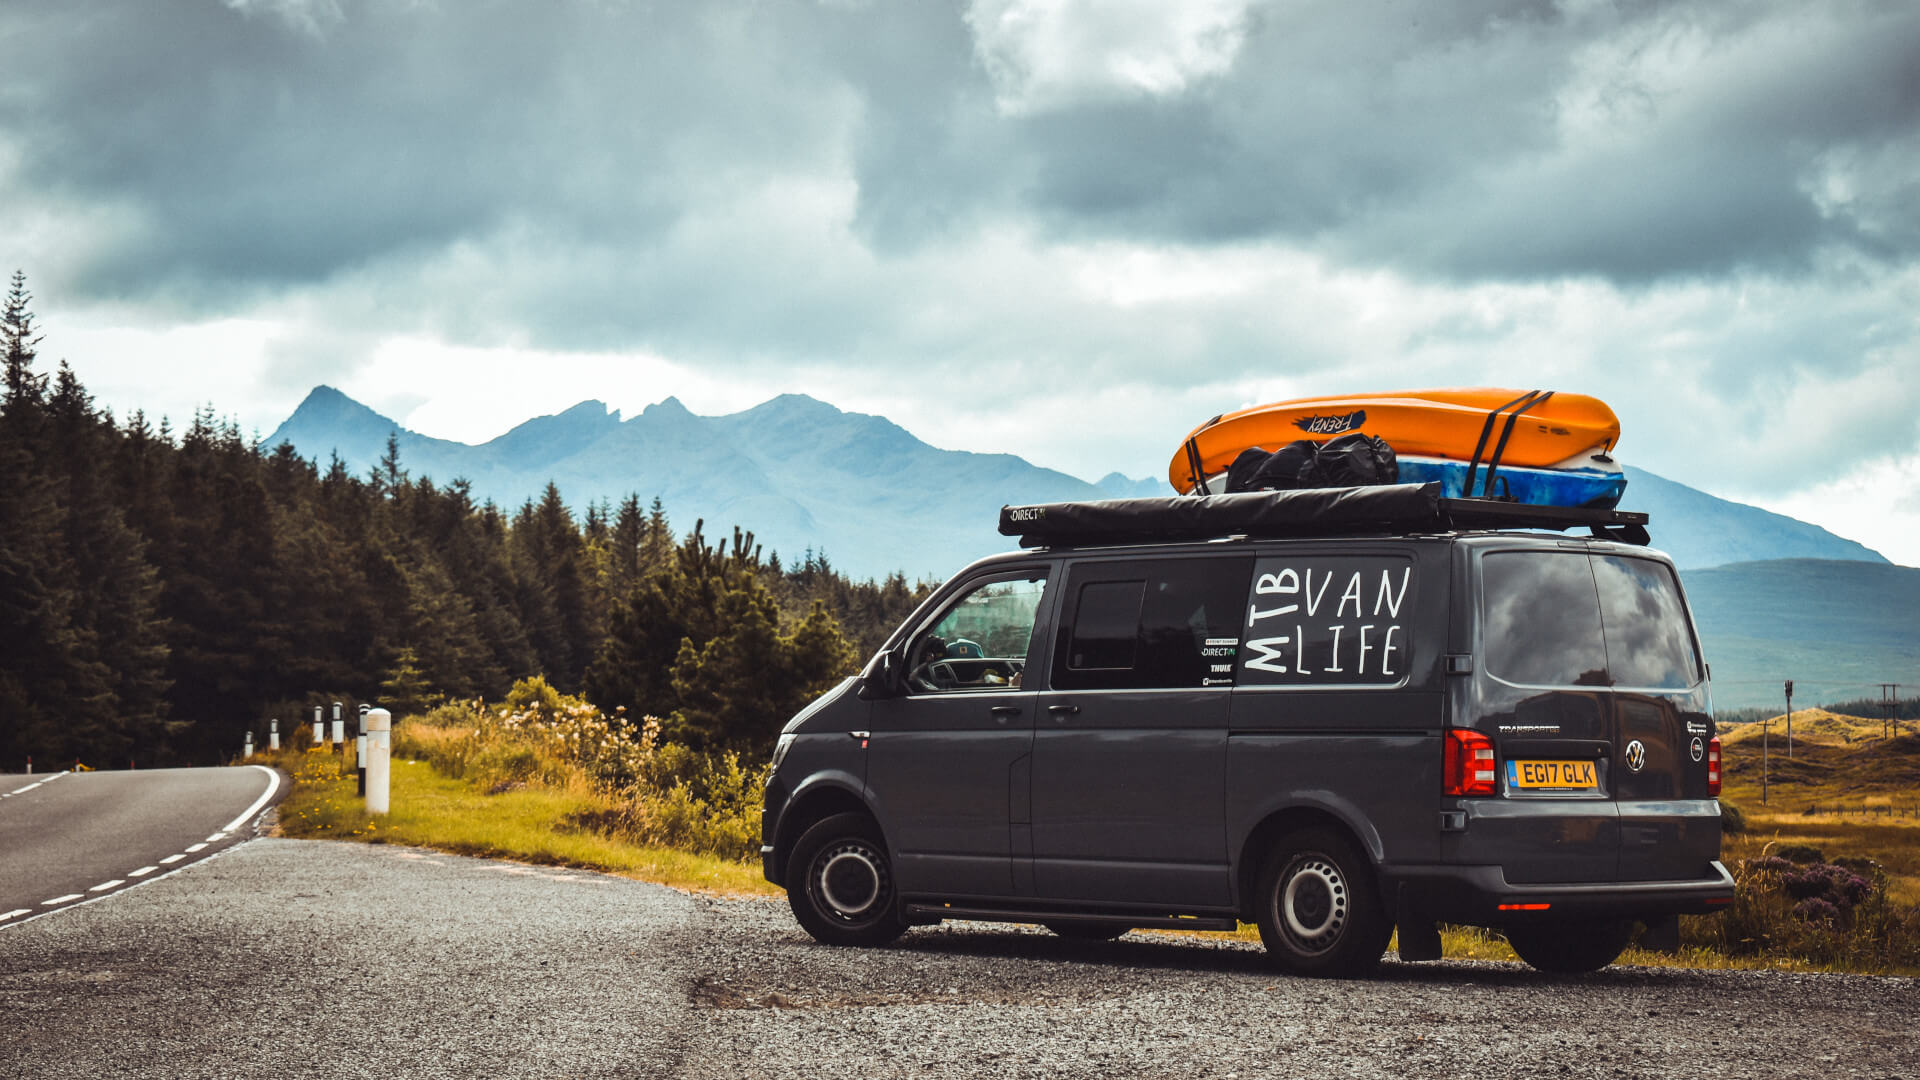 Direct4x4 expedition offroading overland green laning custom autostyling accessories for the amazing VW Volkswagen Transporter T5 and T6 long and short wheel base.